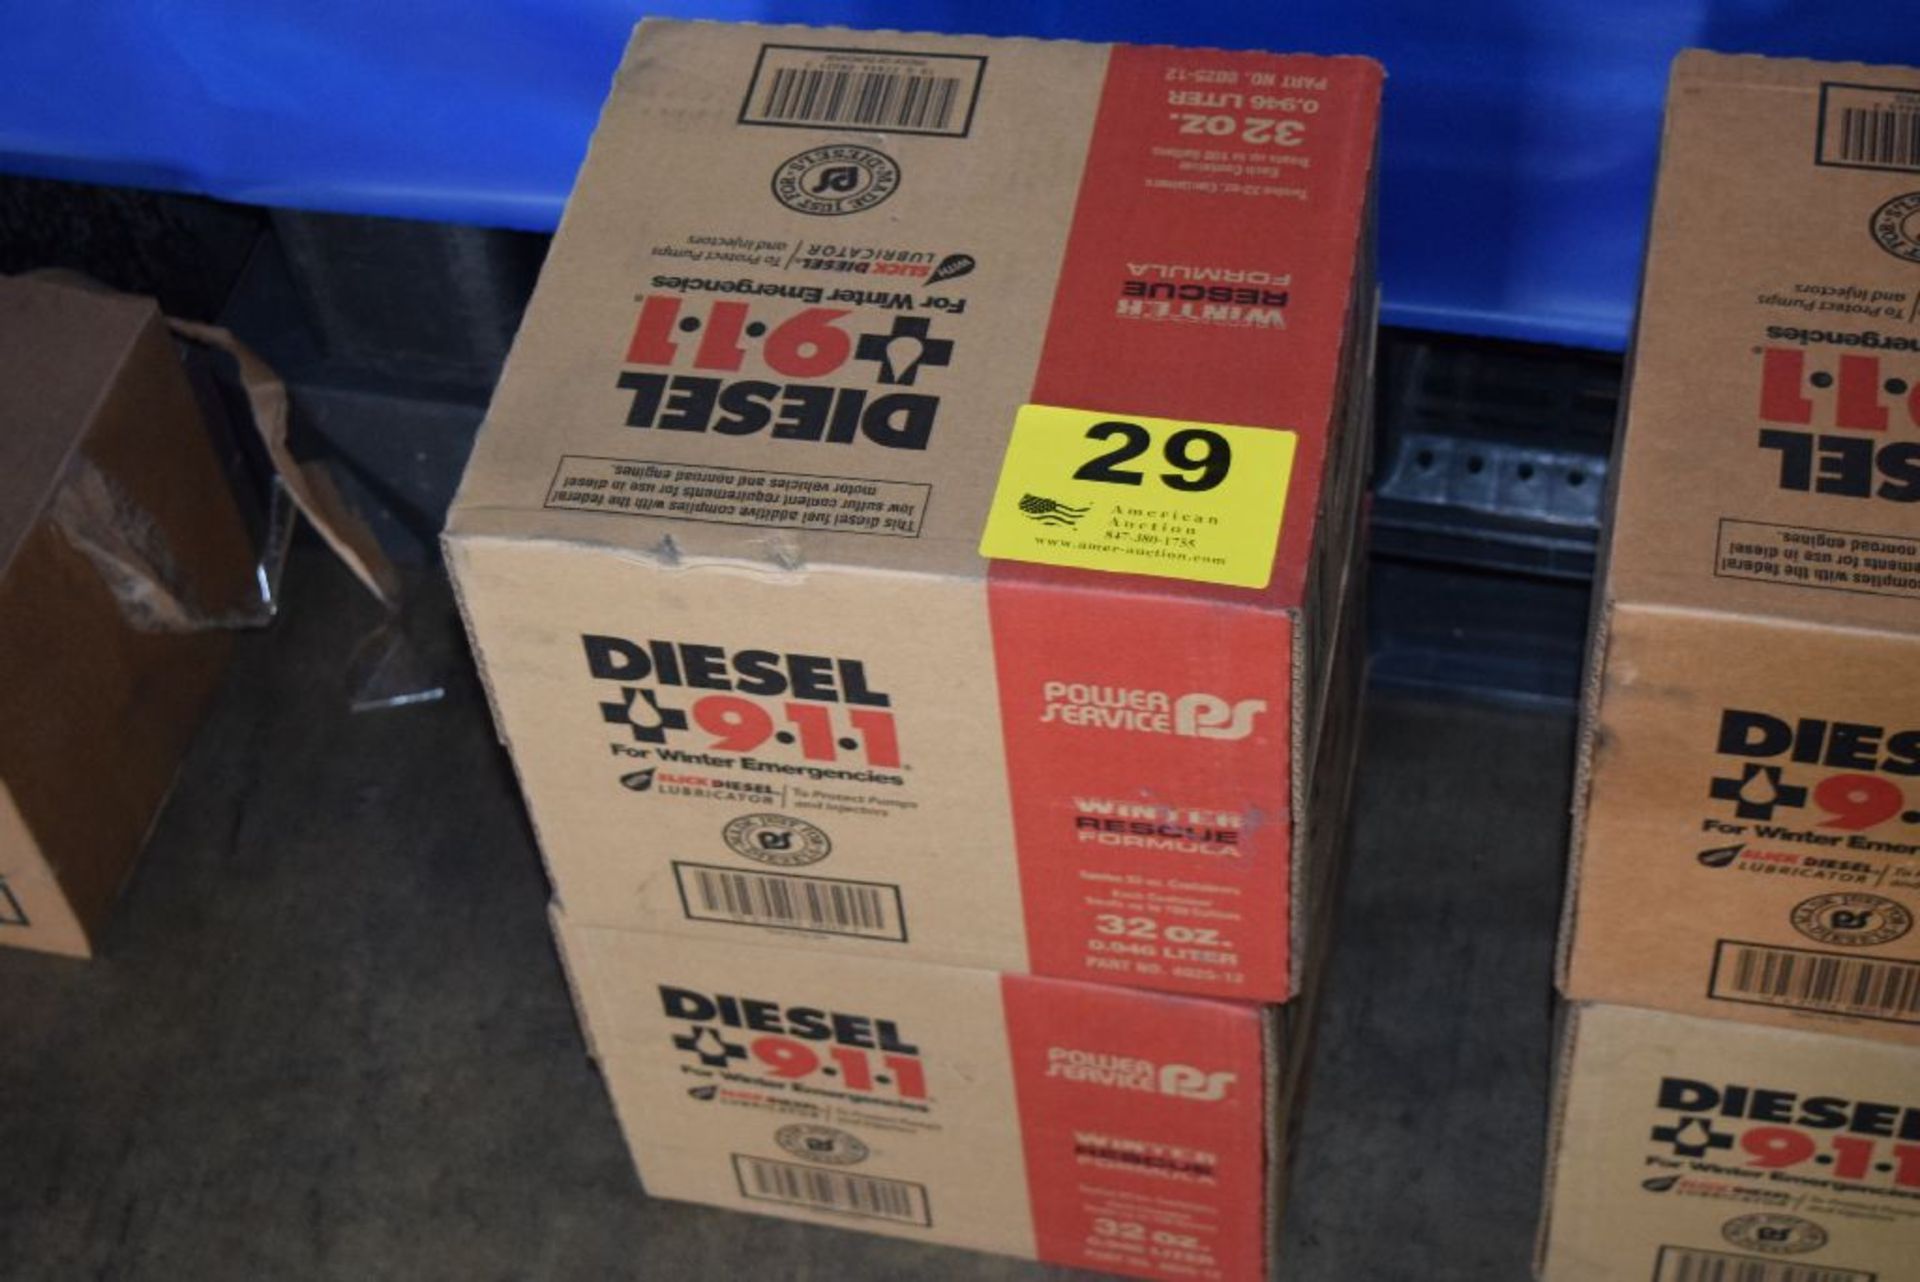 POWER SERVICE 32OZ. DIESEL WINTER RESCUE FORMULA IN TWO BOXES